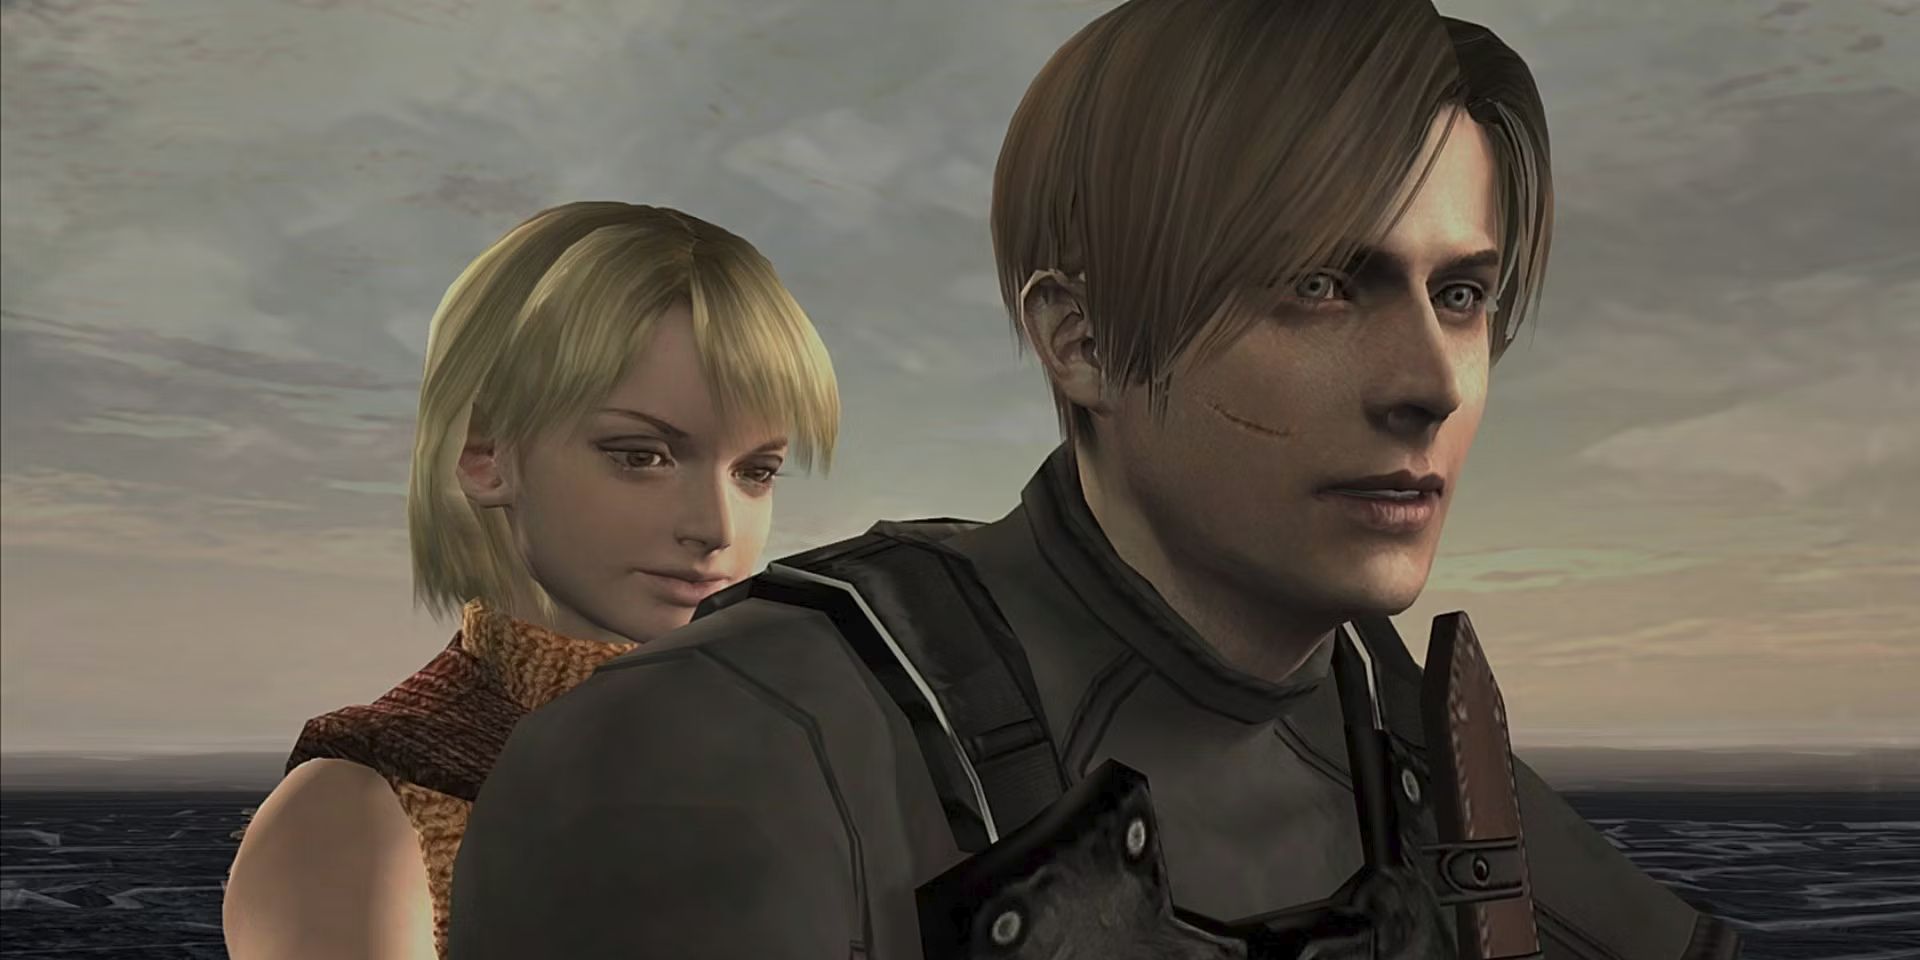 Ashley and Leon look back at the destroyed island from the jet ski in front of a colorful sunrise at the end of the original Resident Evil 4